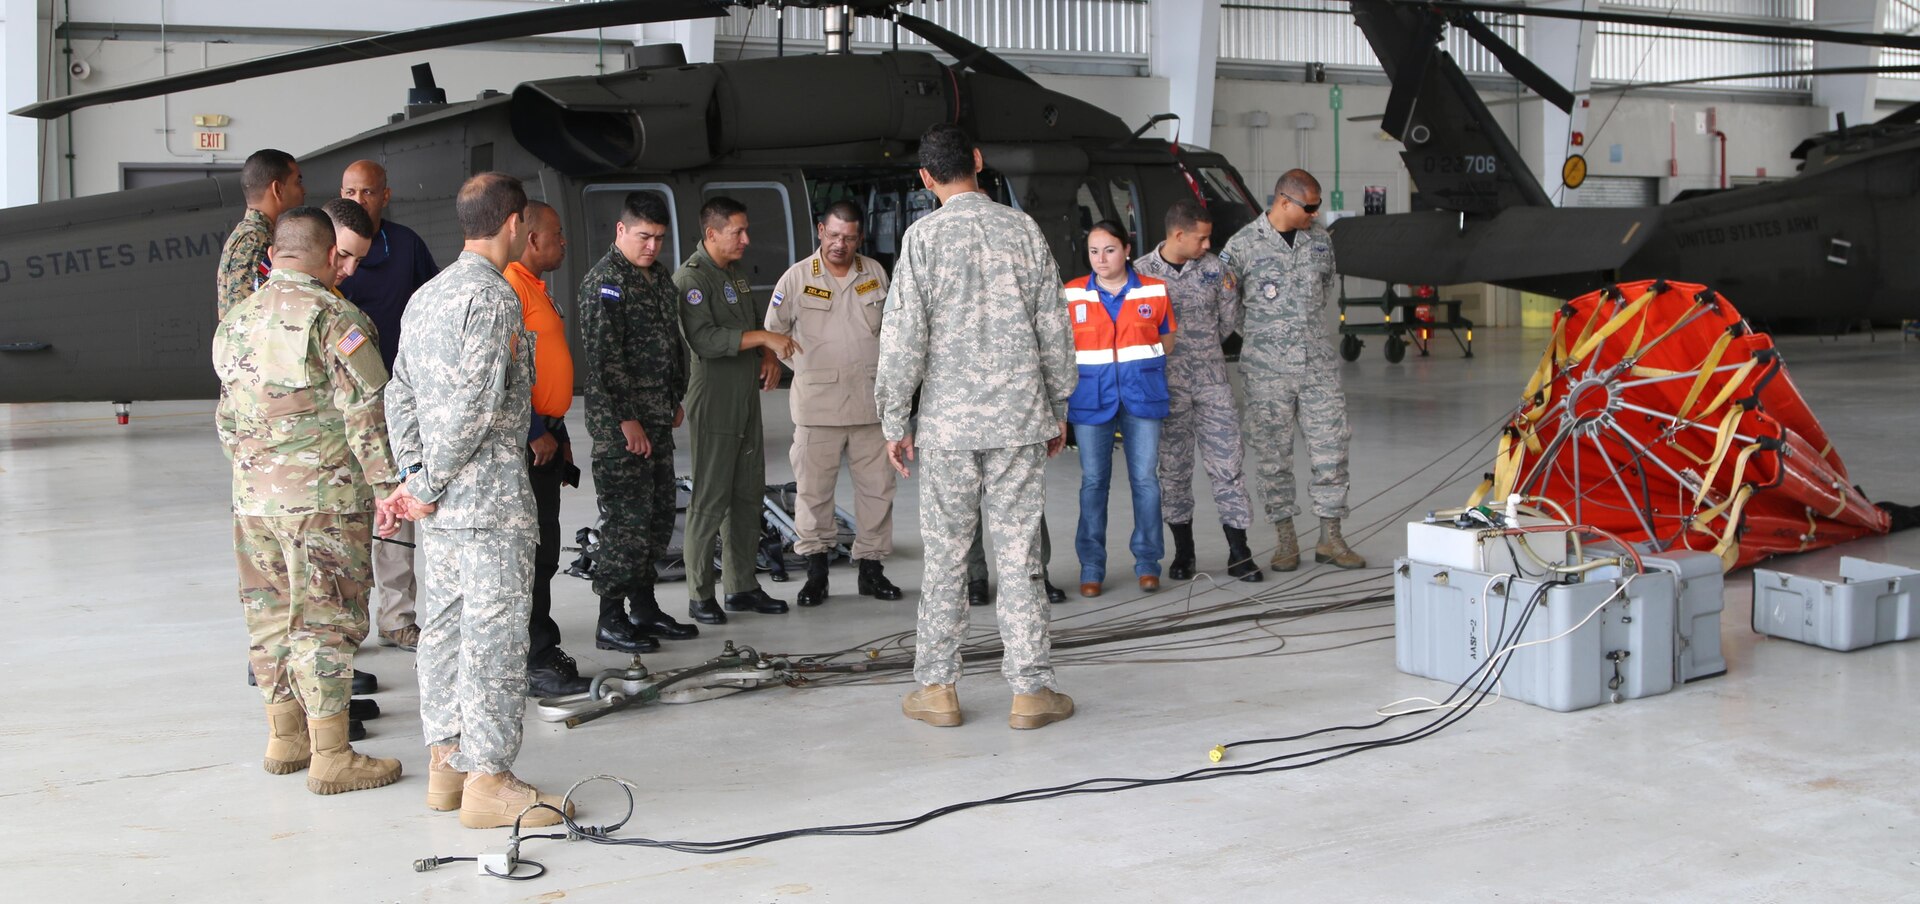 Guard members from Puerto Rico answer questions about helicopter bucket use in forest fires for a visiting delegation from their visitors in the State Partnership Program in San Juan, Puerto Rico.